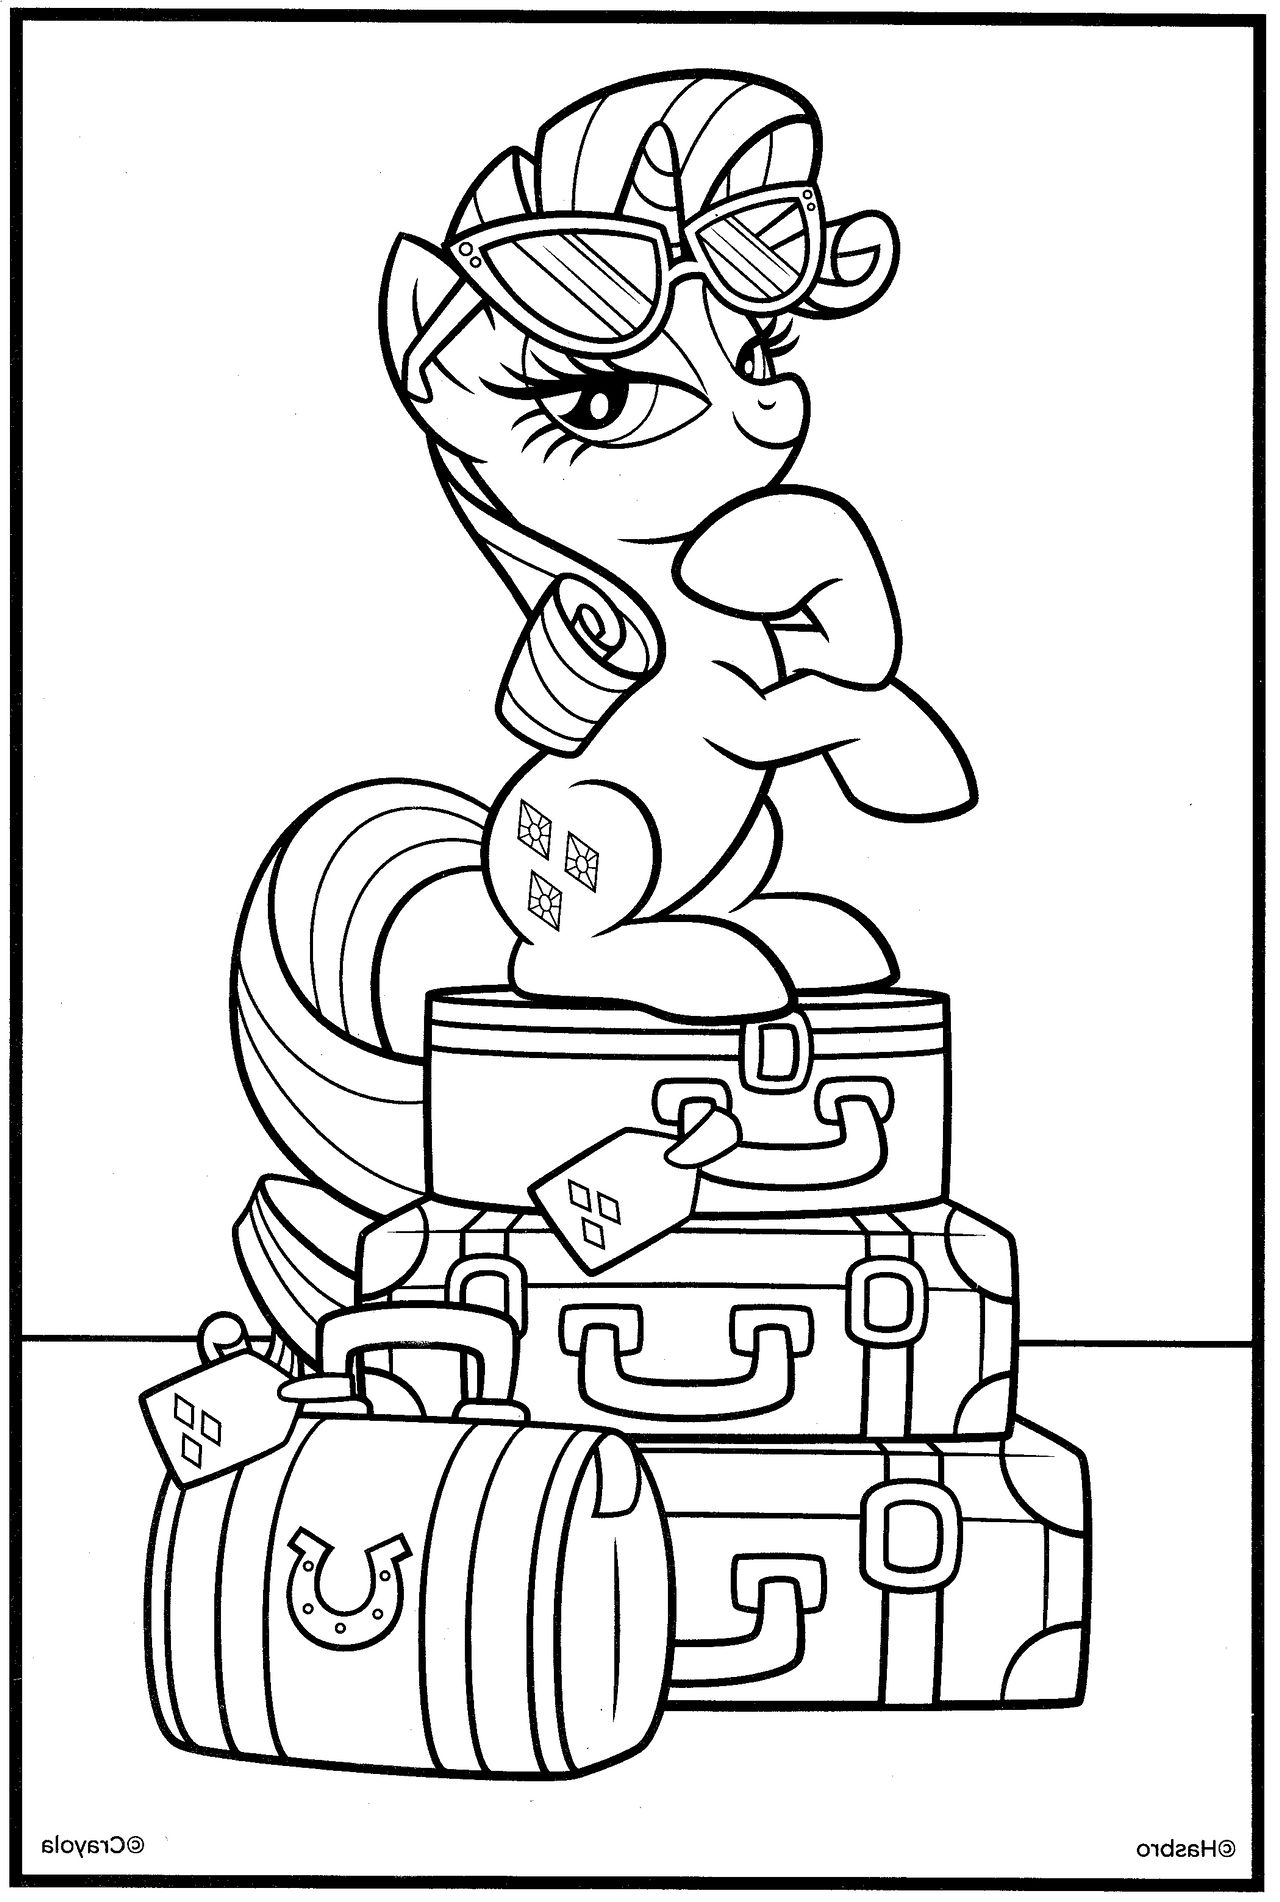 031 MLP My Little Pony coloring page by magnificent-coloring on DeviantArt